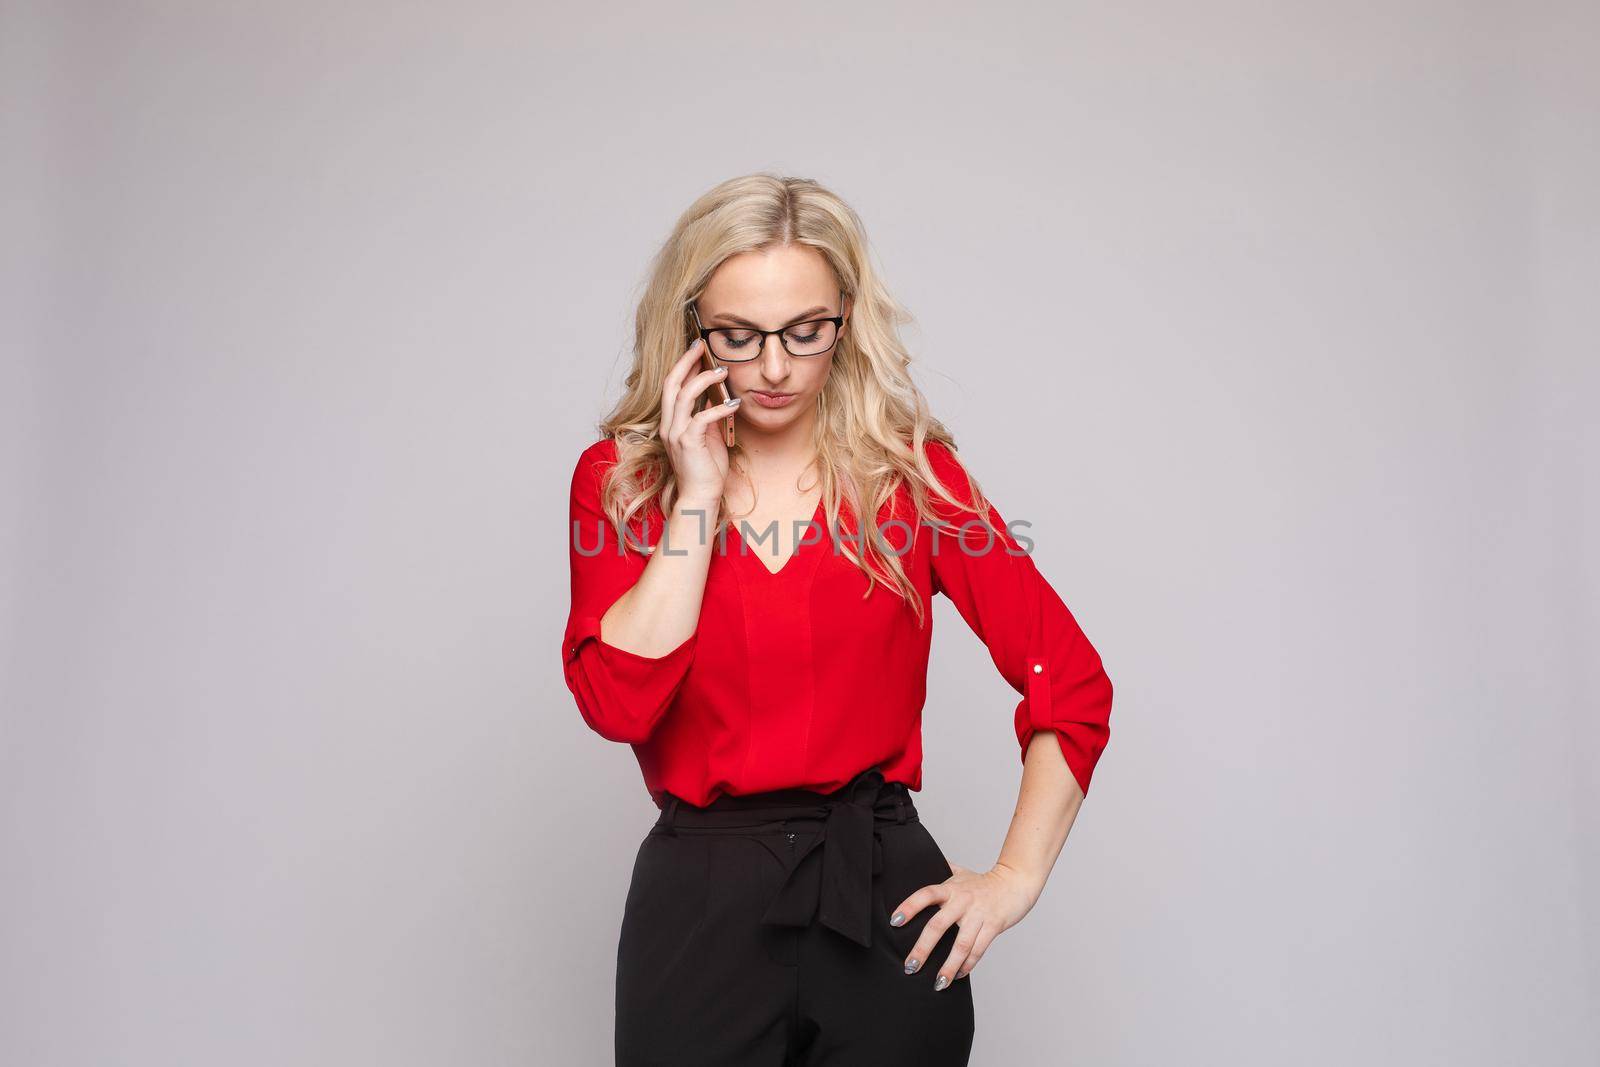 Front view of smiling woman wearing red blouse and skirt keeping phone and laughing on isolated background. Cheerful blonde messaging and communicating in studio. Concept of technology and business.